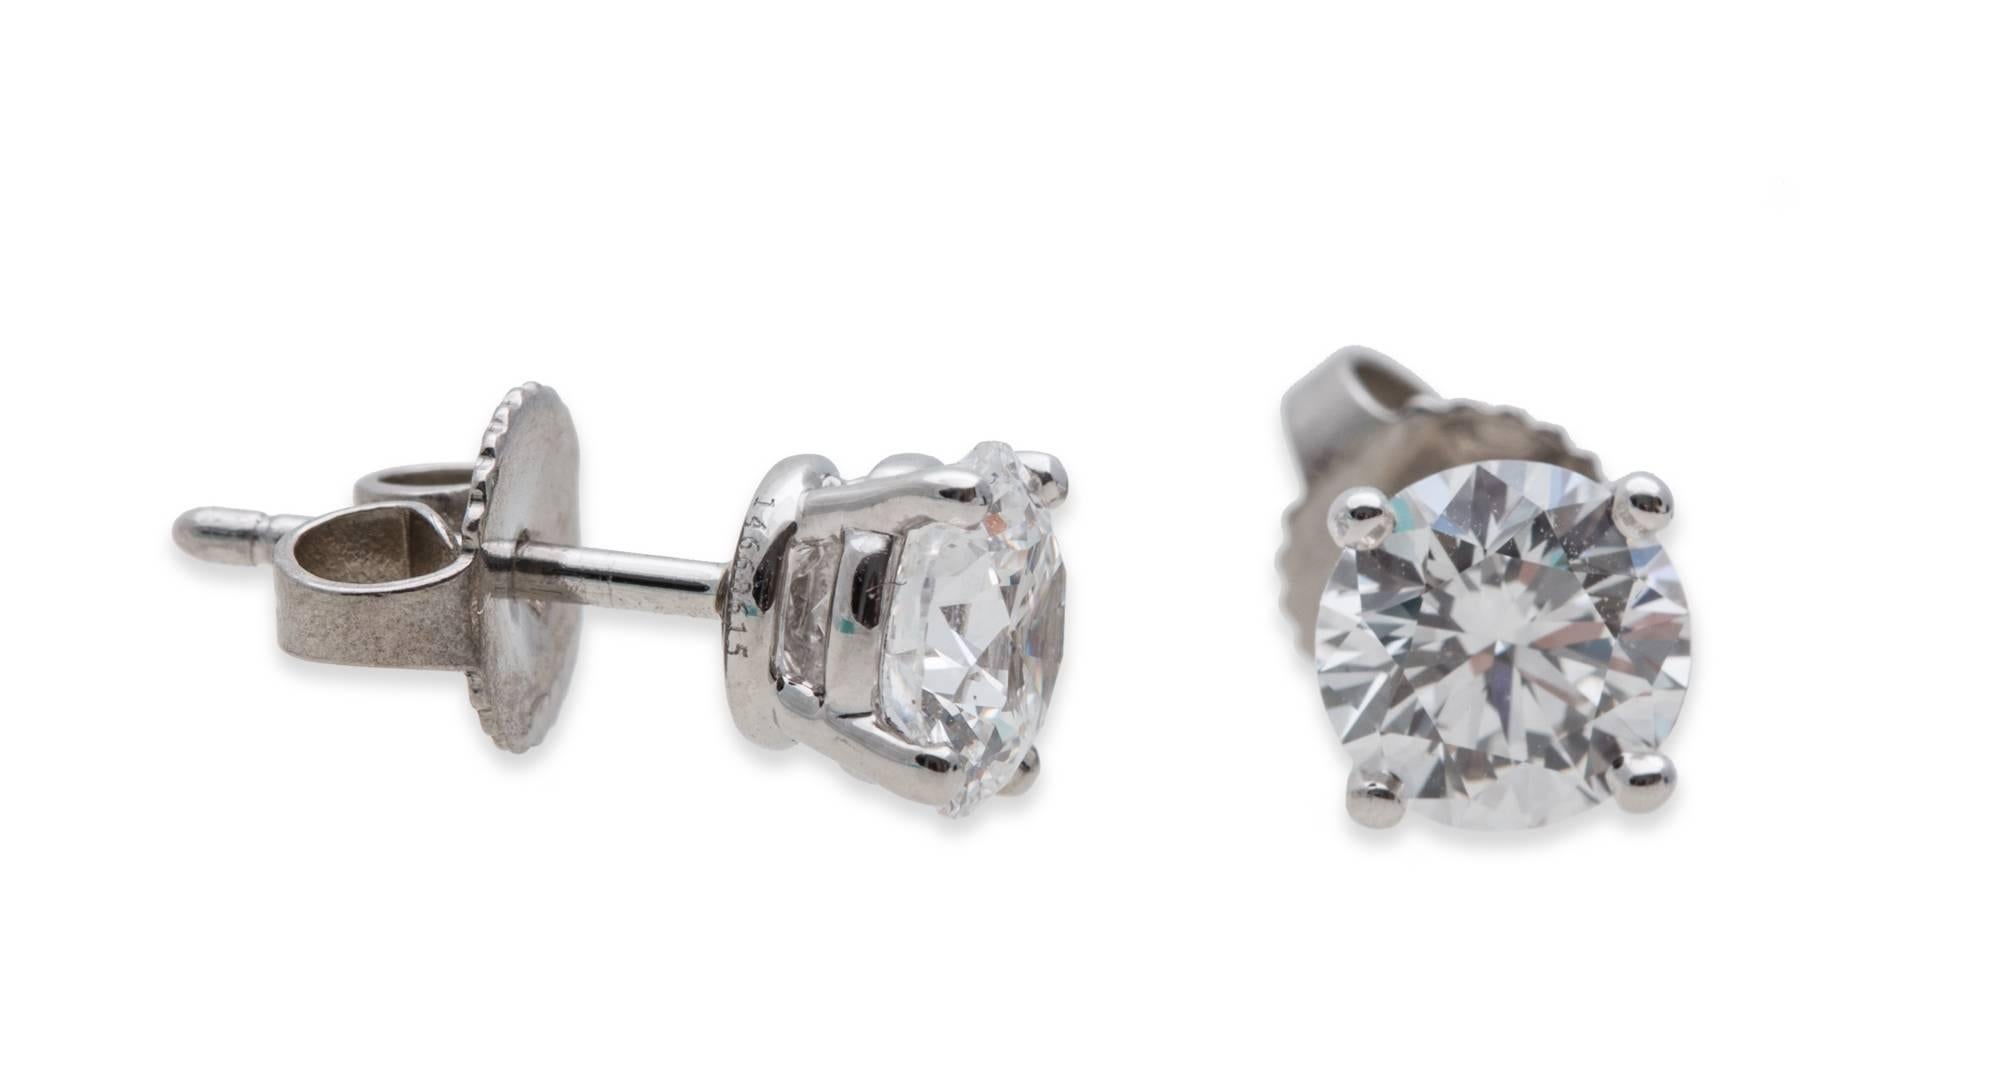 Tiffany & Co. Round Diamond Stud Earrings in Platinum. 0.72 ct E VS1 and 0.74 ct E VS1, Total Diamond Weight: 1.46 ct, Signed: 